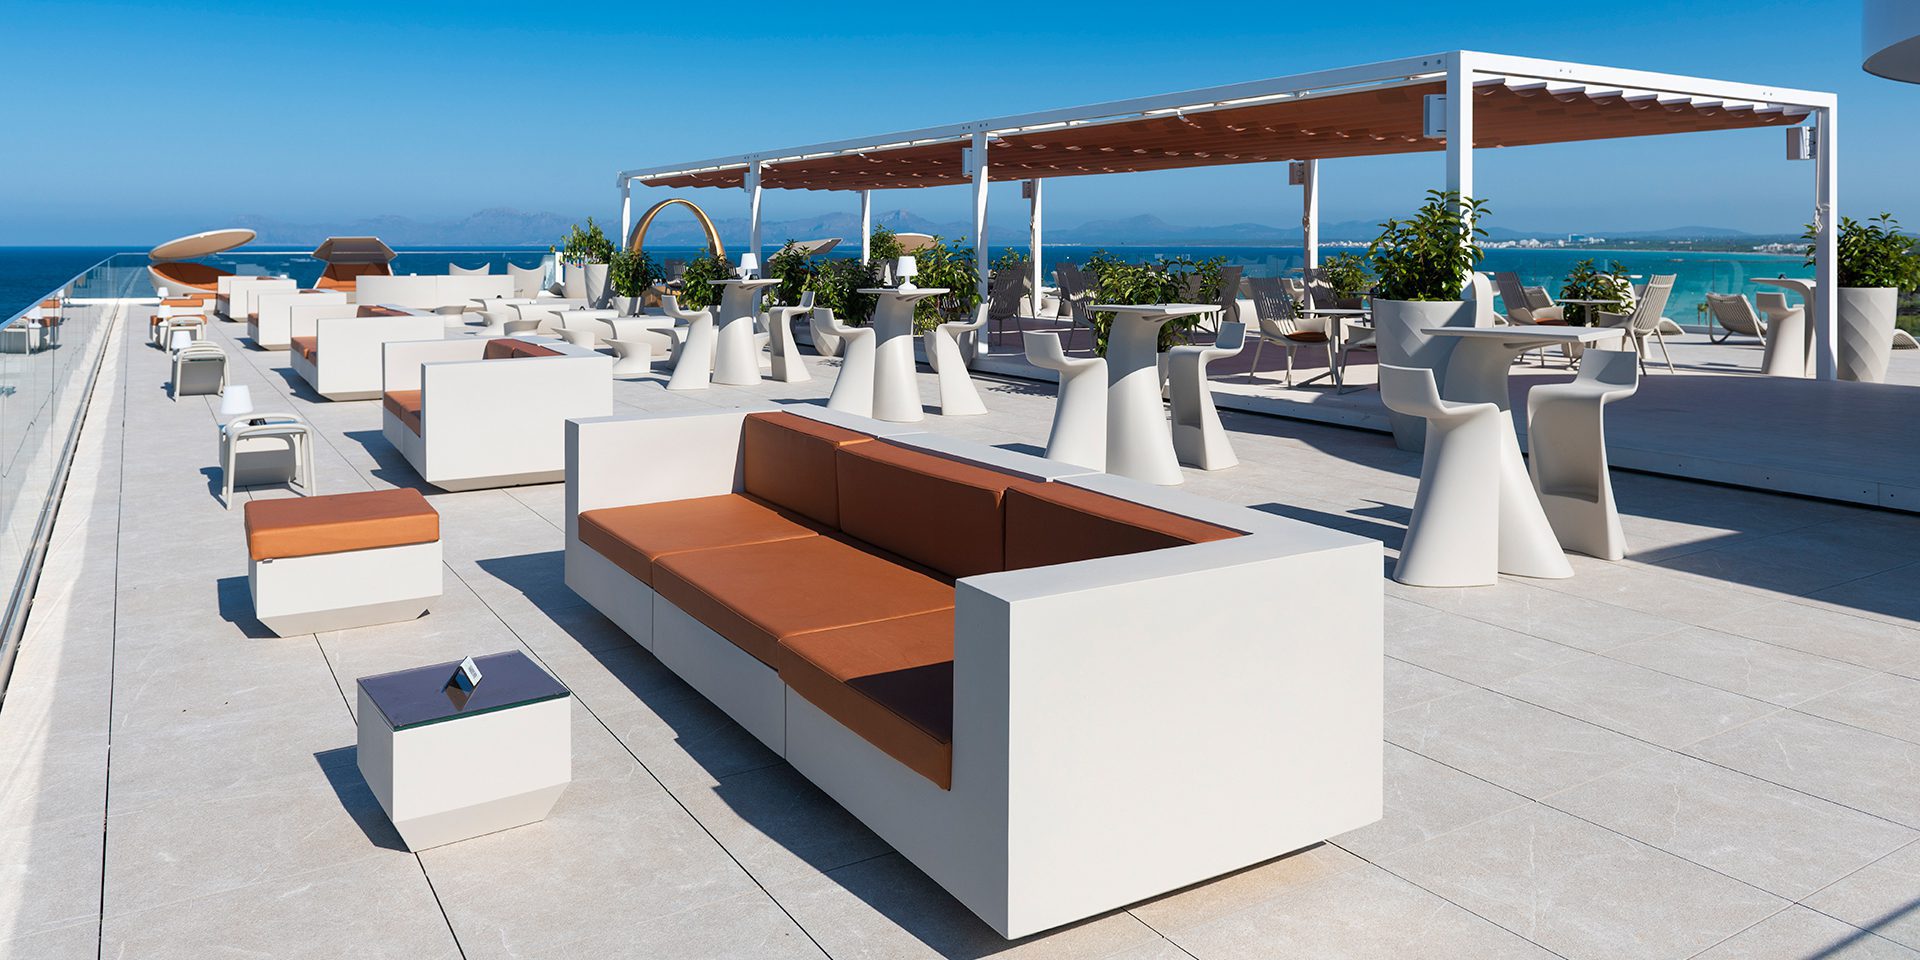 Outdoor contract furniture Vela sofa and Wing stools and tables, hospitality furniture by Vondom